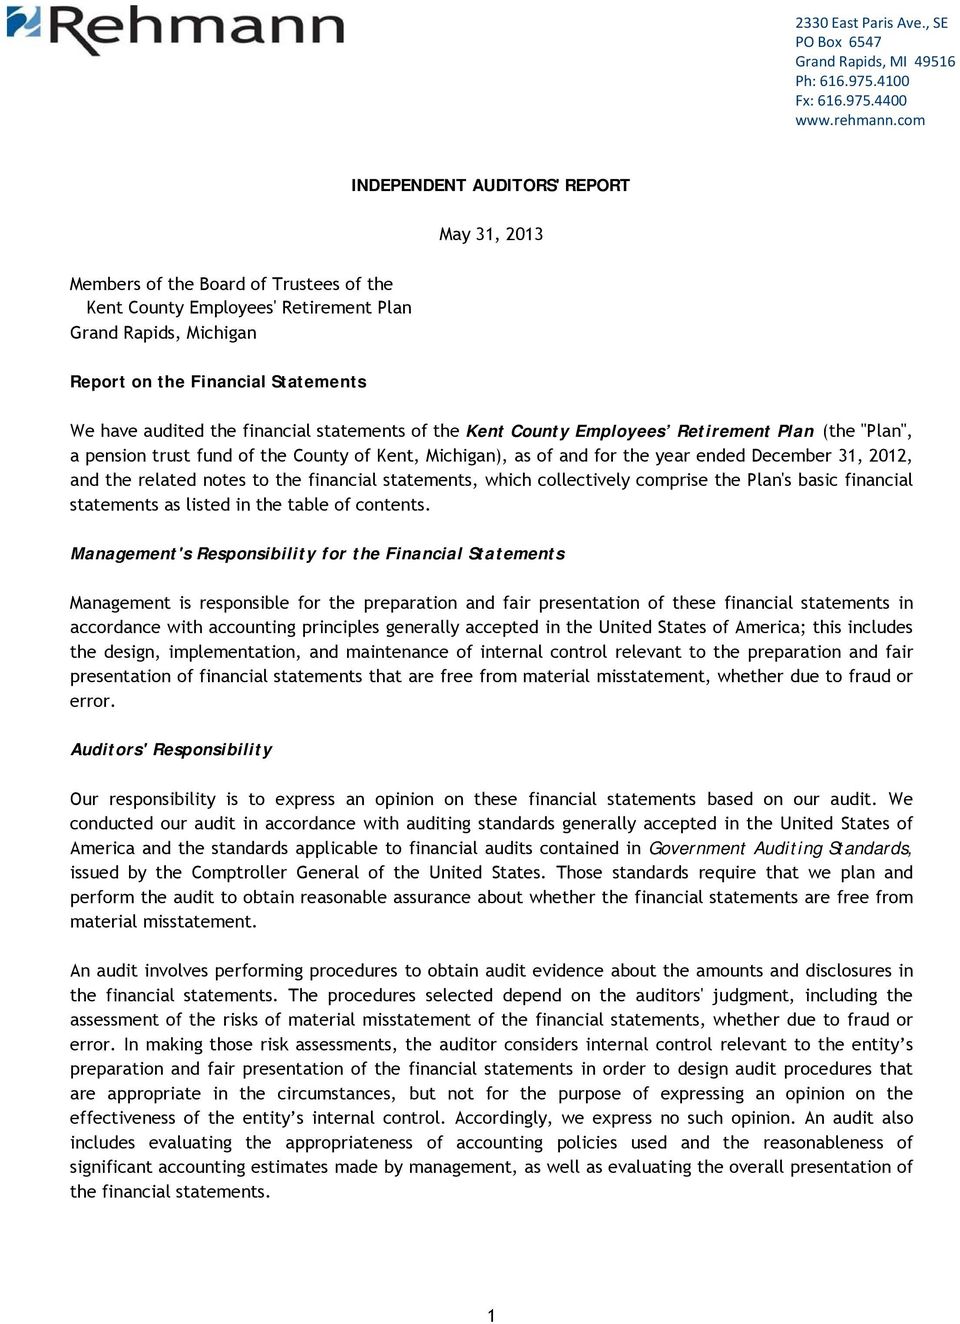 the financial statements of the Kent County Employees Retirement Plan (the "Plan", a pension trust fund of the County of Kent, Michigan), as of and for the year ended December 31, 2012, and the